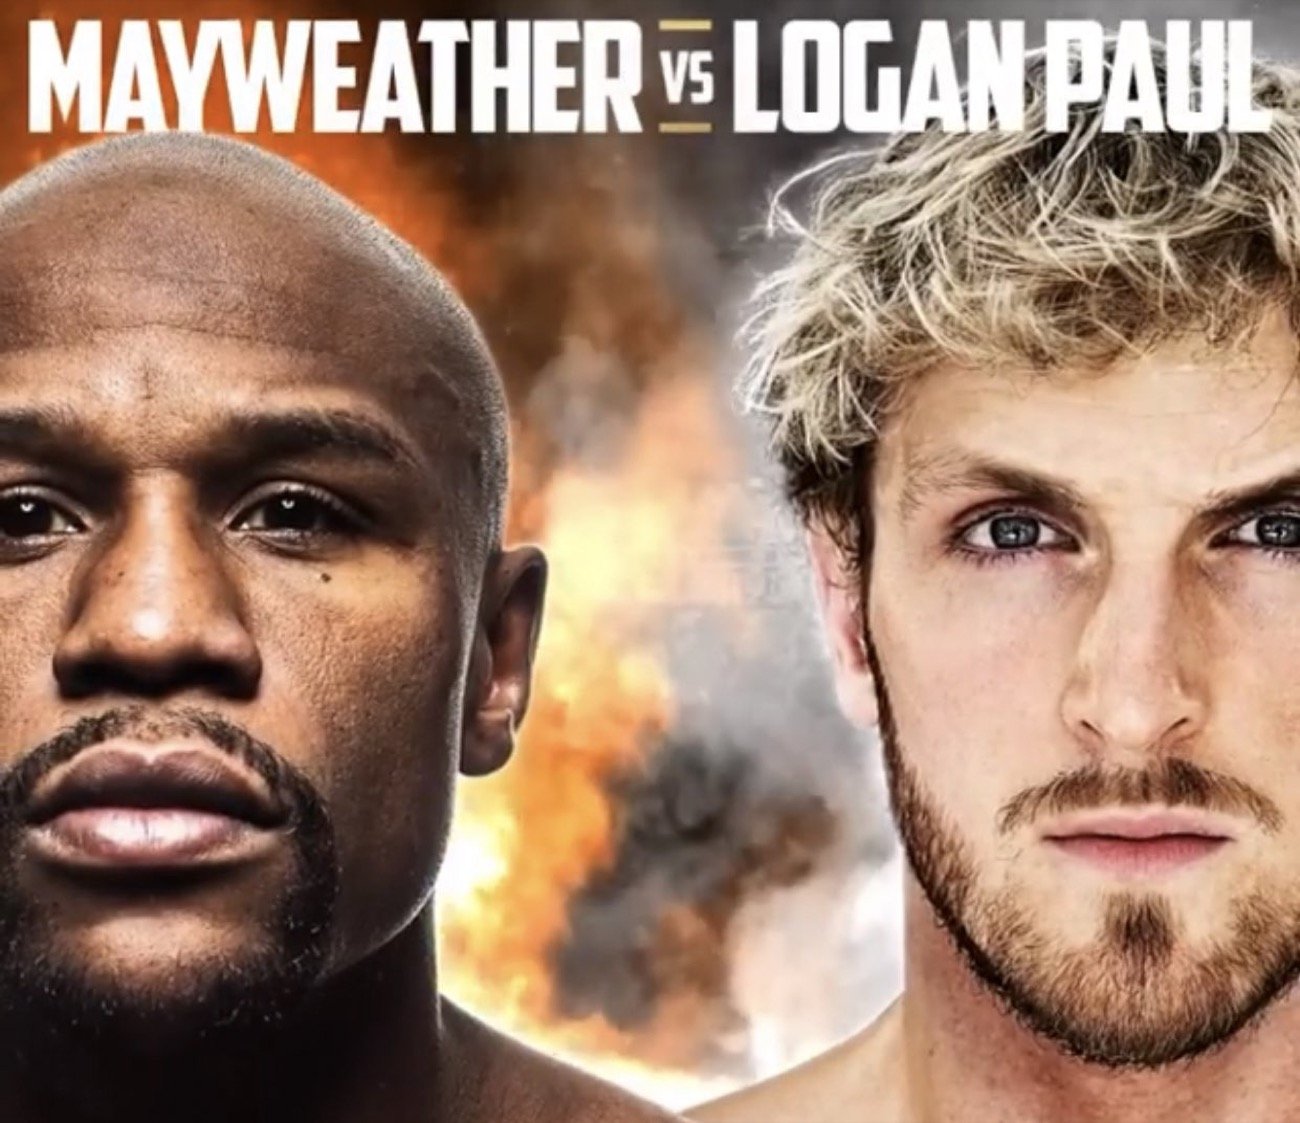 Mayweather vs Logan Paul OFFICIAL! PPV Event On February 20, 2021